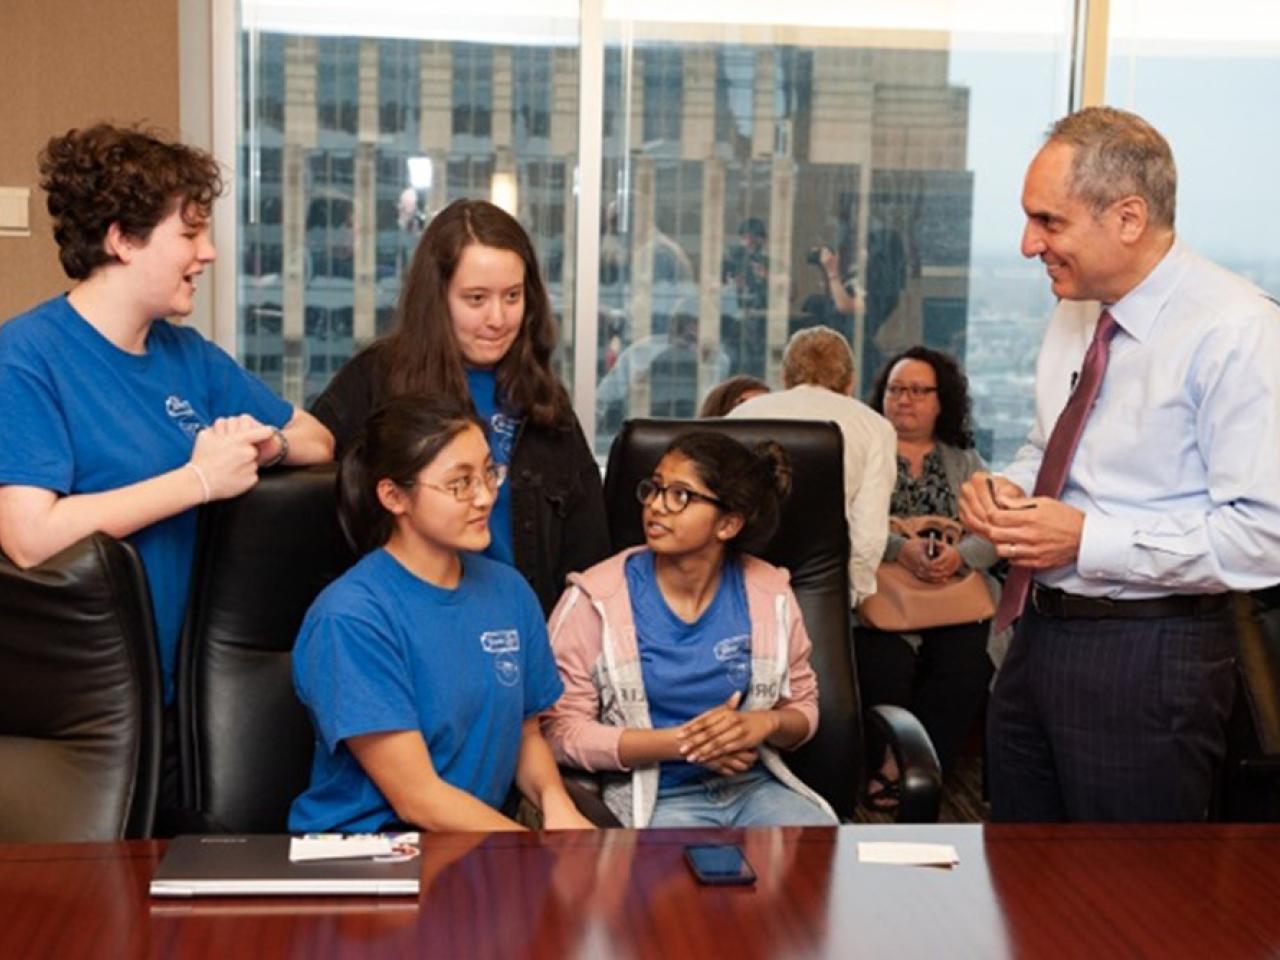 Members of the Computer Glitz team from left — Clare Dixon, Ellie Sprinthall, Ashley Chen and Prapthi Jayesh Sirrkay — with U.S. Bank CEO Andy Cecere at a 2018 Technovation event.